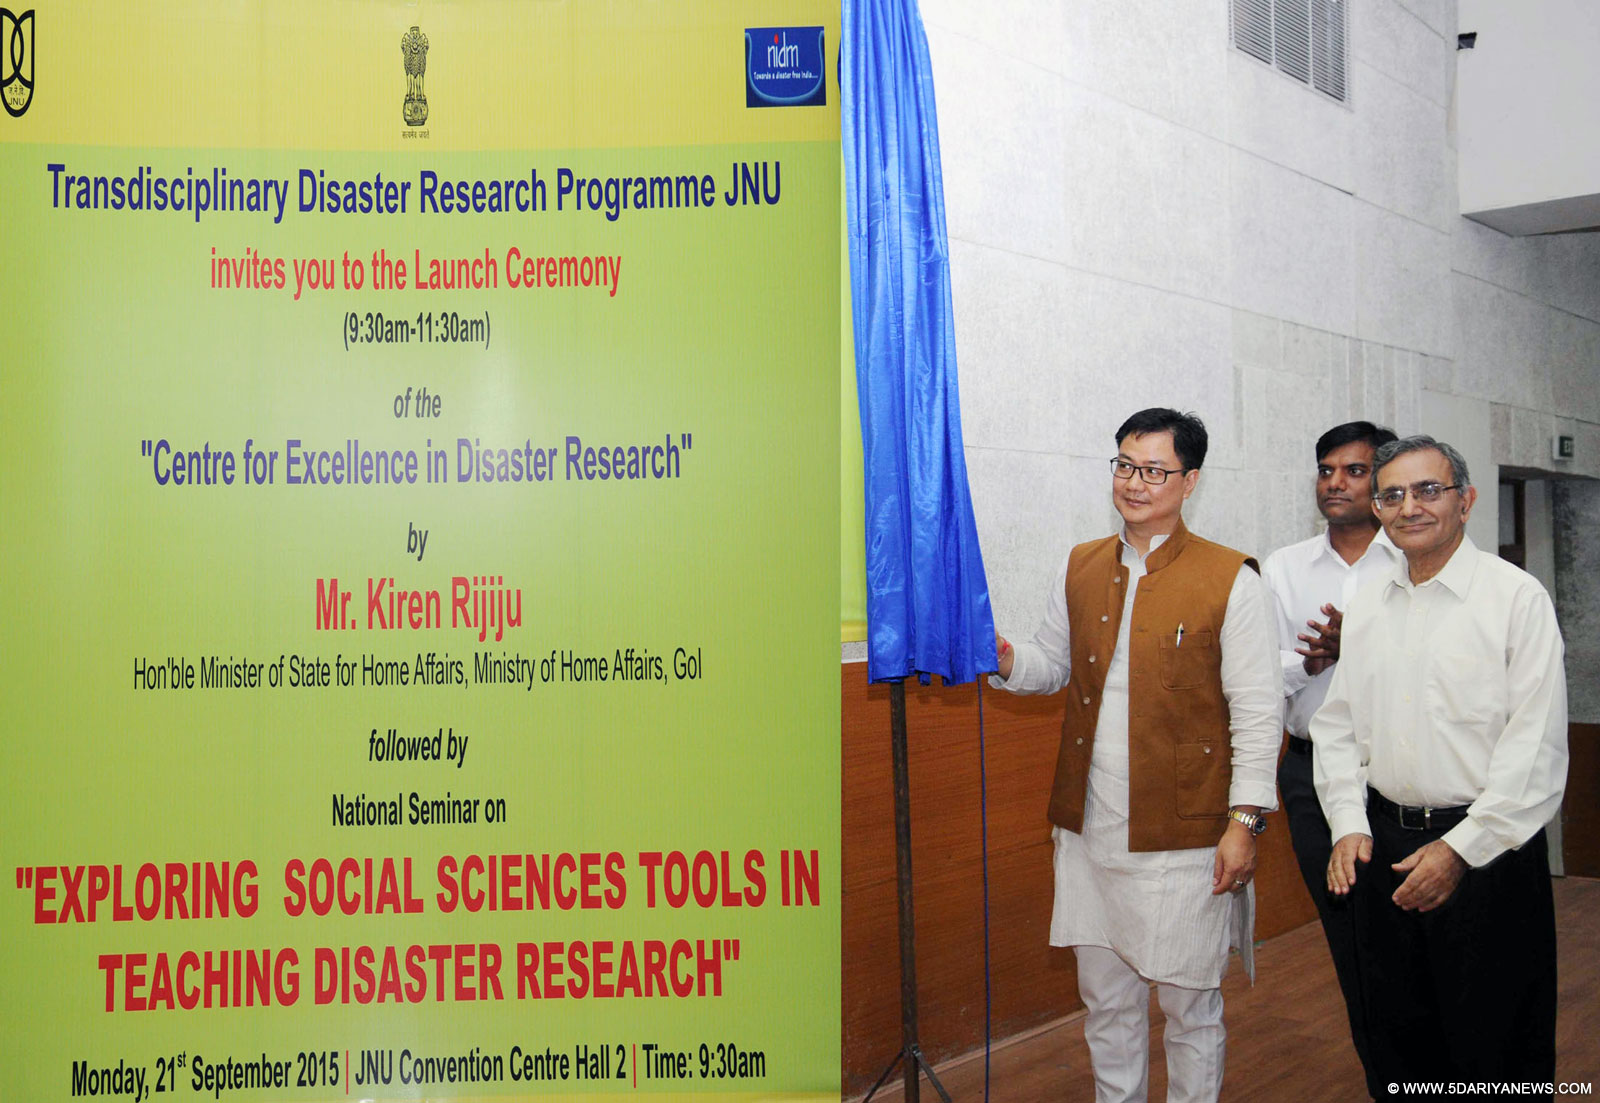 The Minister of State for Home Affairs, Shri Kiren Rijiju unveiling the plaque to launch the “Centre For Excellence in Disaster Research”, in New Delhi on September 21, 2015.